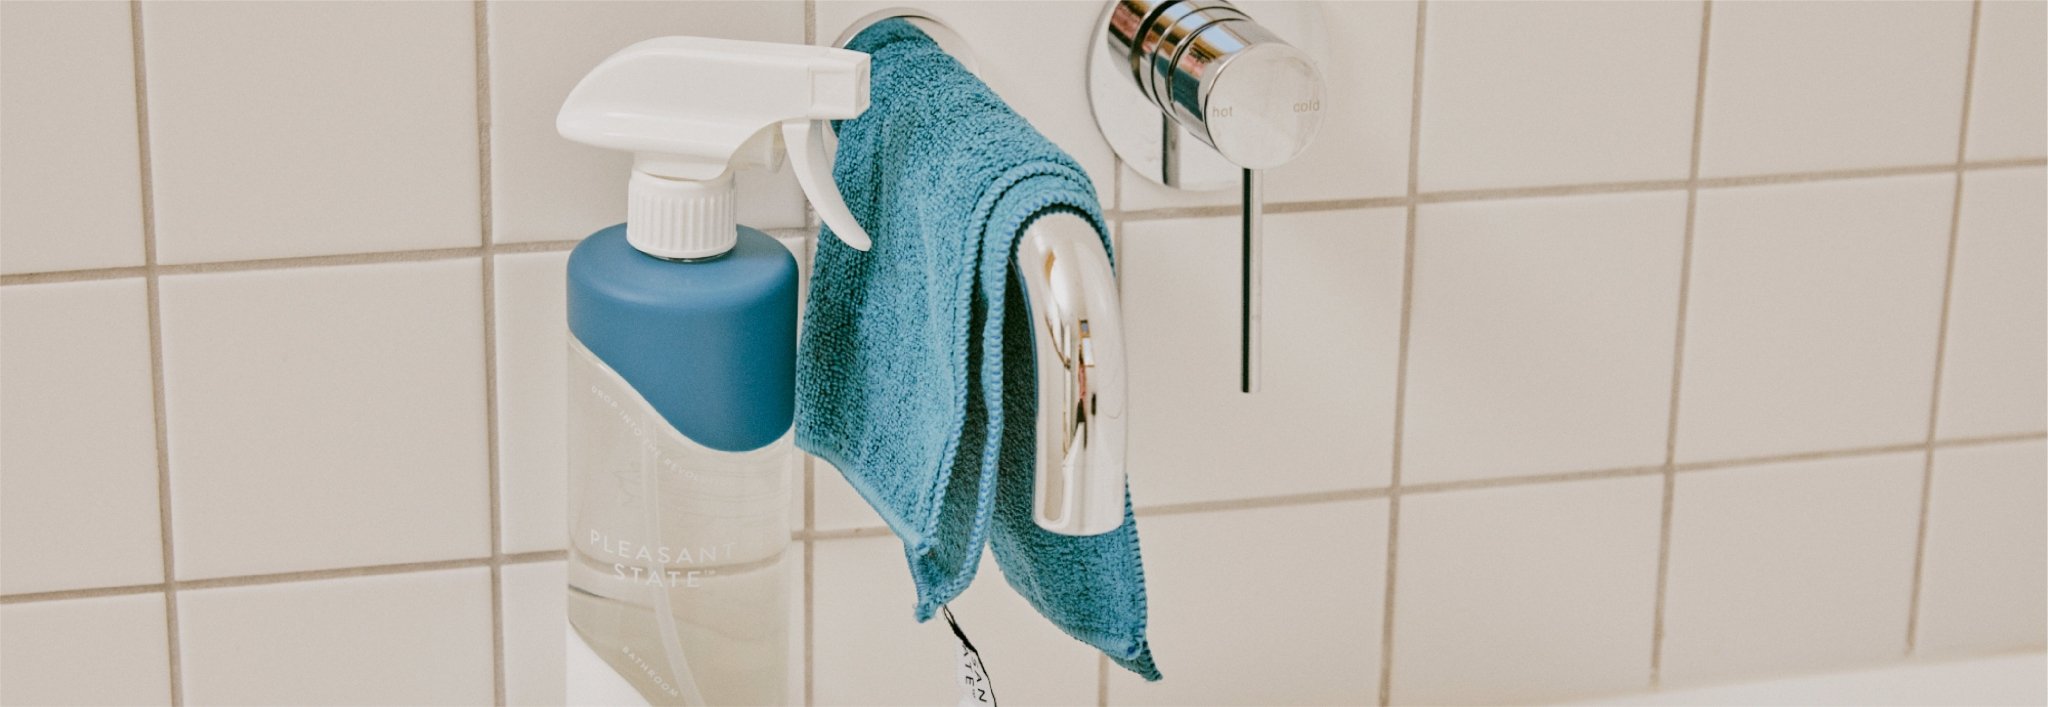 Best Cleaning Product For Your Bathroom, Worth It?